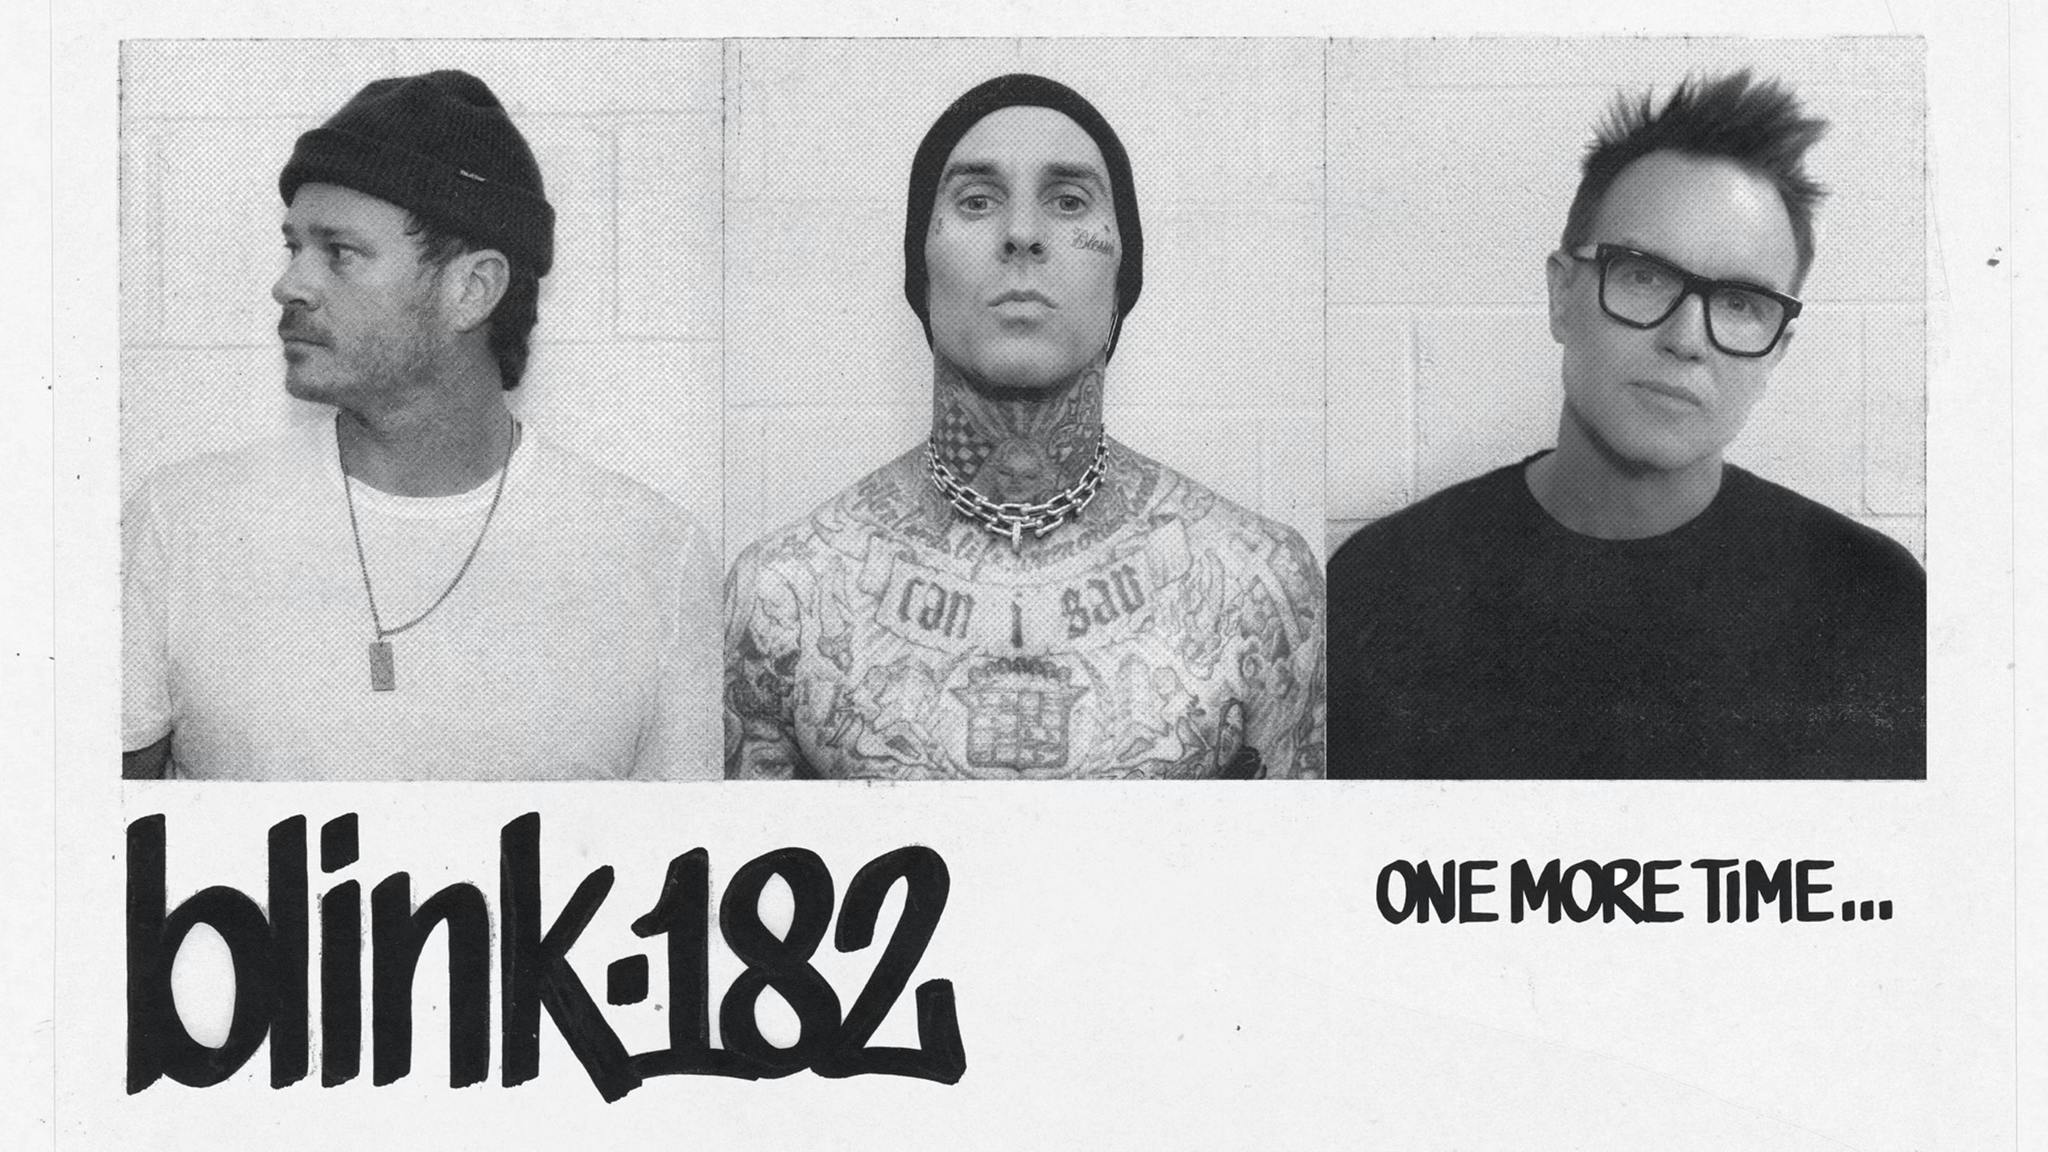 Listen to two new blink-182 songs, SEE YOU and CUT ME OFF